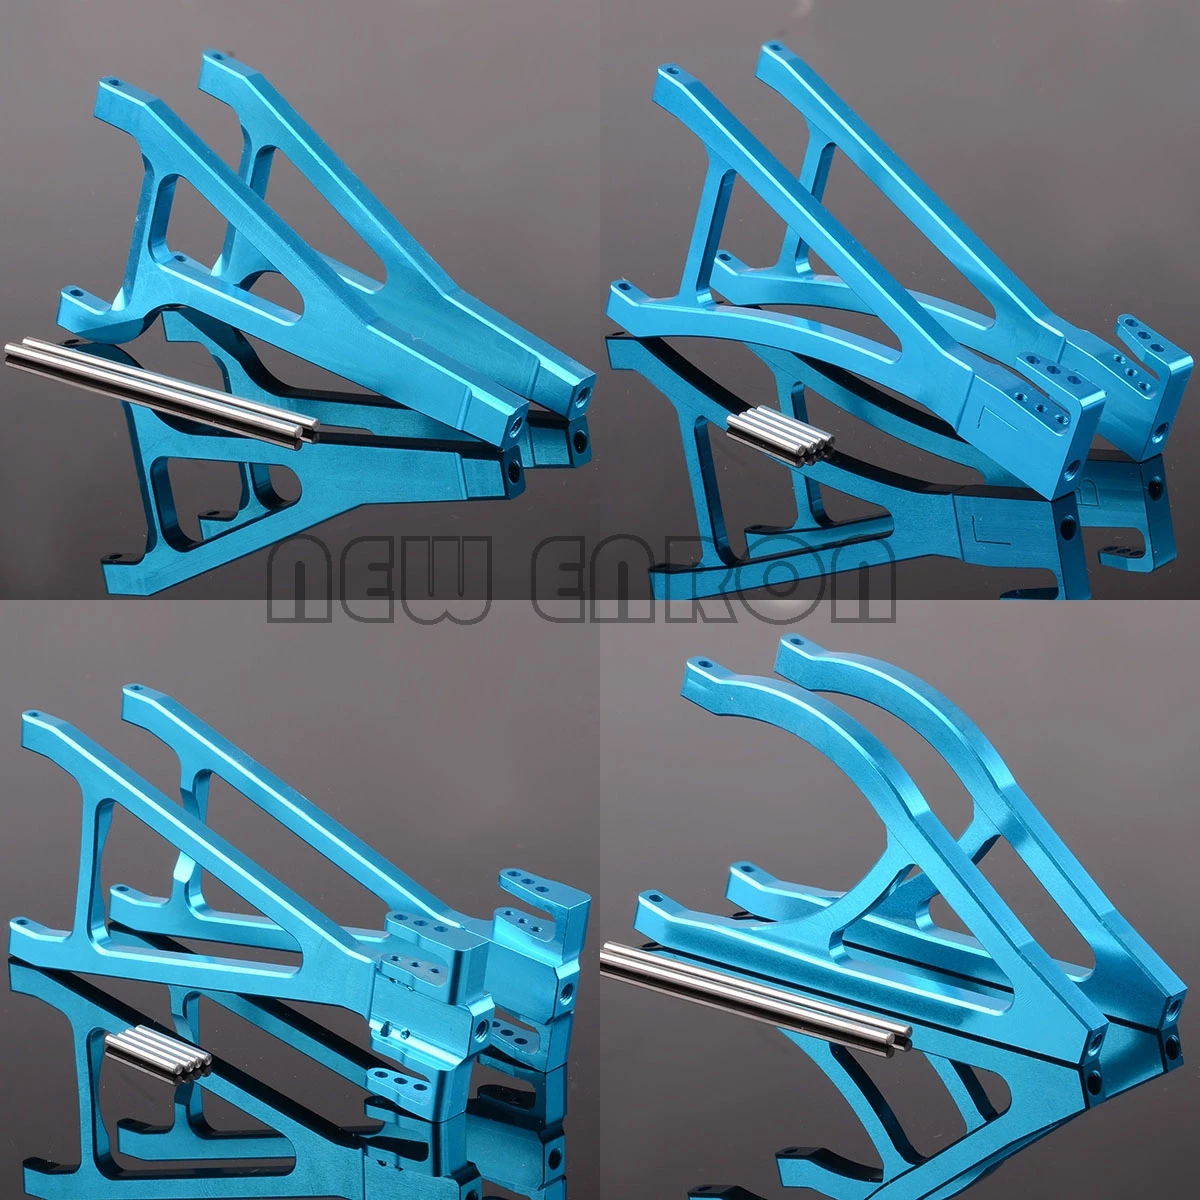 

NEW ENRON 8Pcs Front&Rear Upper&Lower Suspension Arms 5331&5333 FOR RC Car Traxxas 1/10 Revo 56076-4 Summit 53097-3